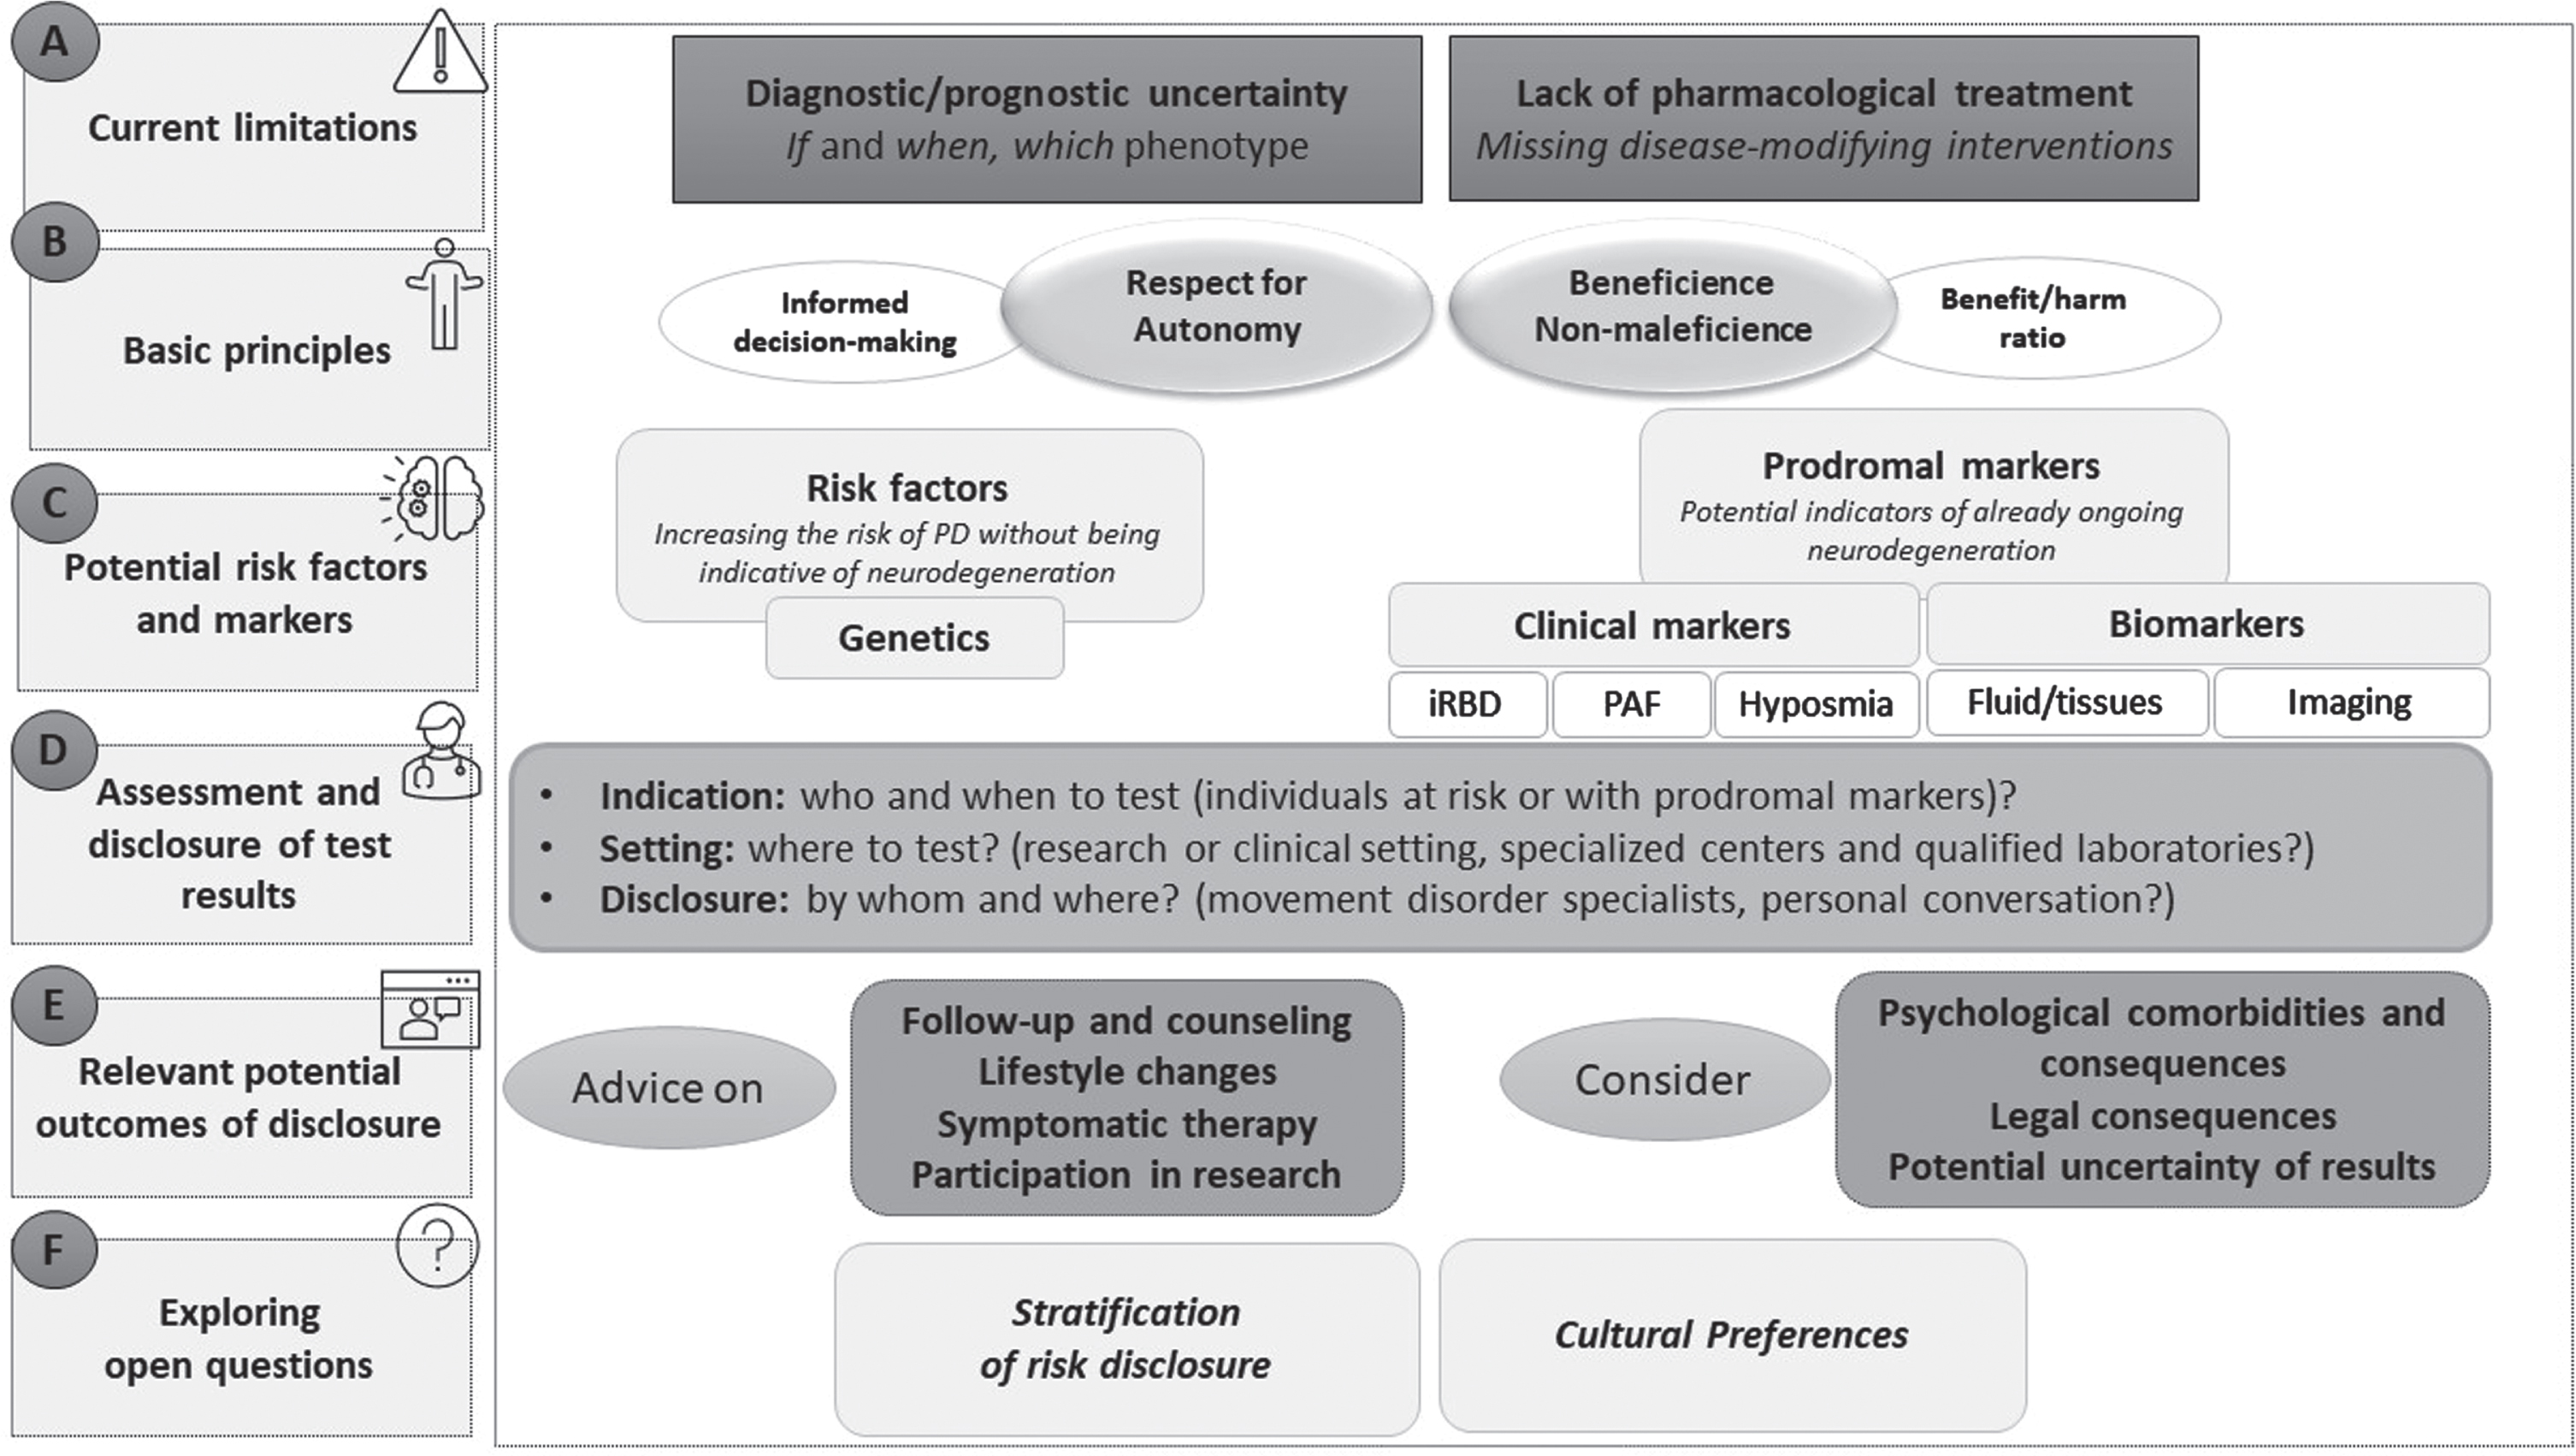 Pillars of risk disclosure and early diagnosis in Parkinson’s disease. The points mentioned in this figure were developed based on the review of the literature of Parkinson’s disease and other neurodegenerative diseases (in particular Alzheimer’s disease) and derived from empirically relevant factors.